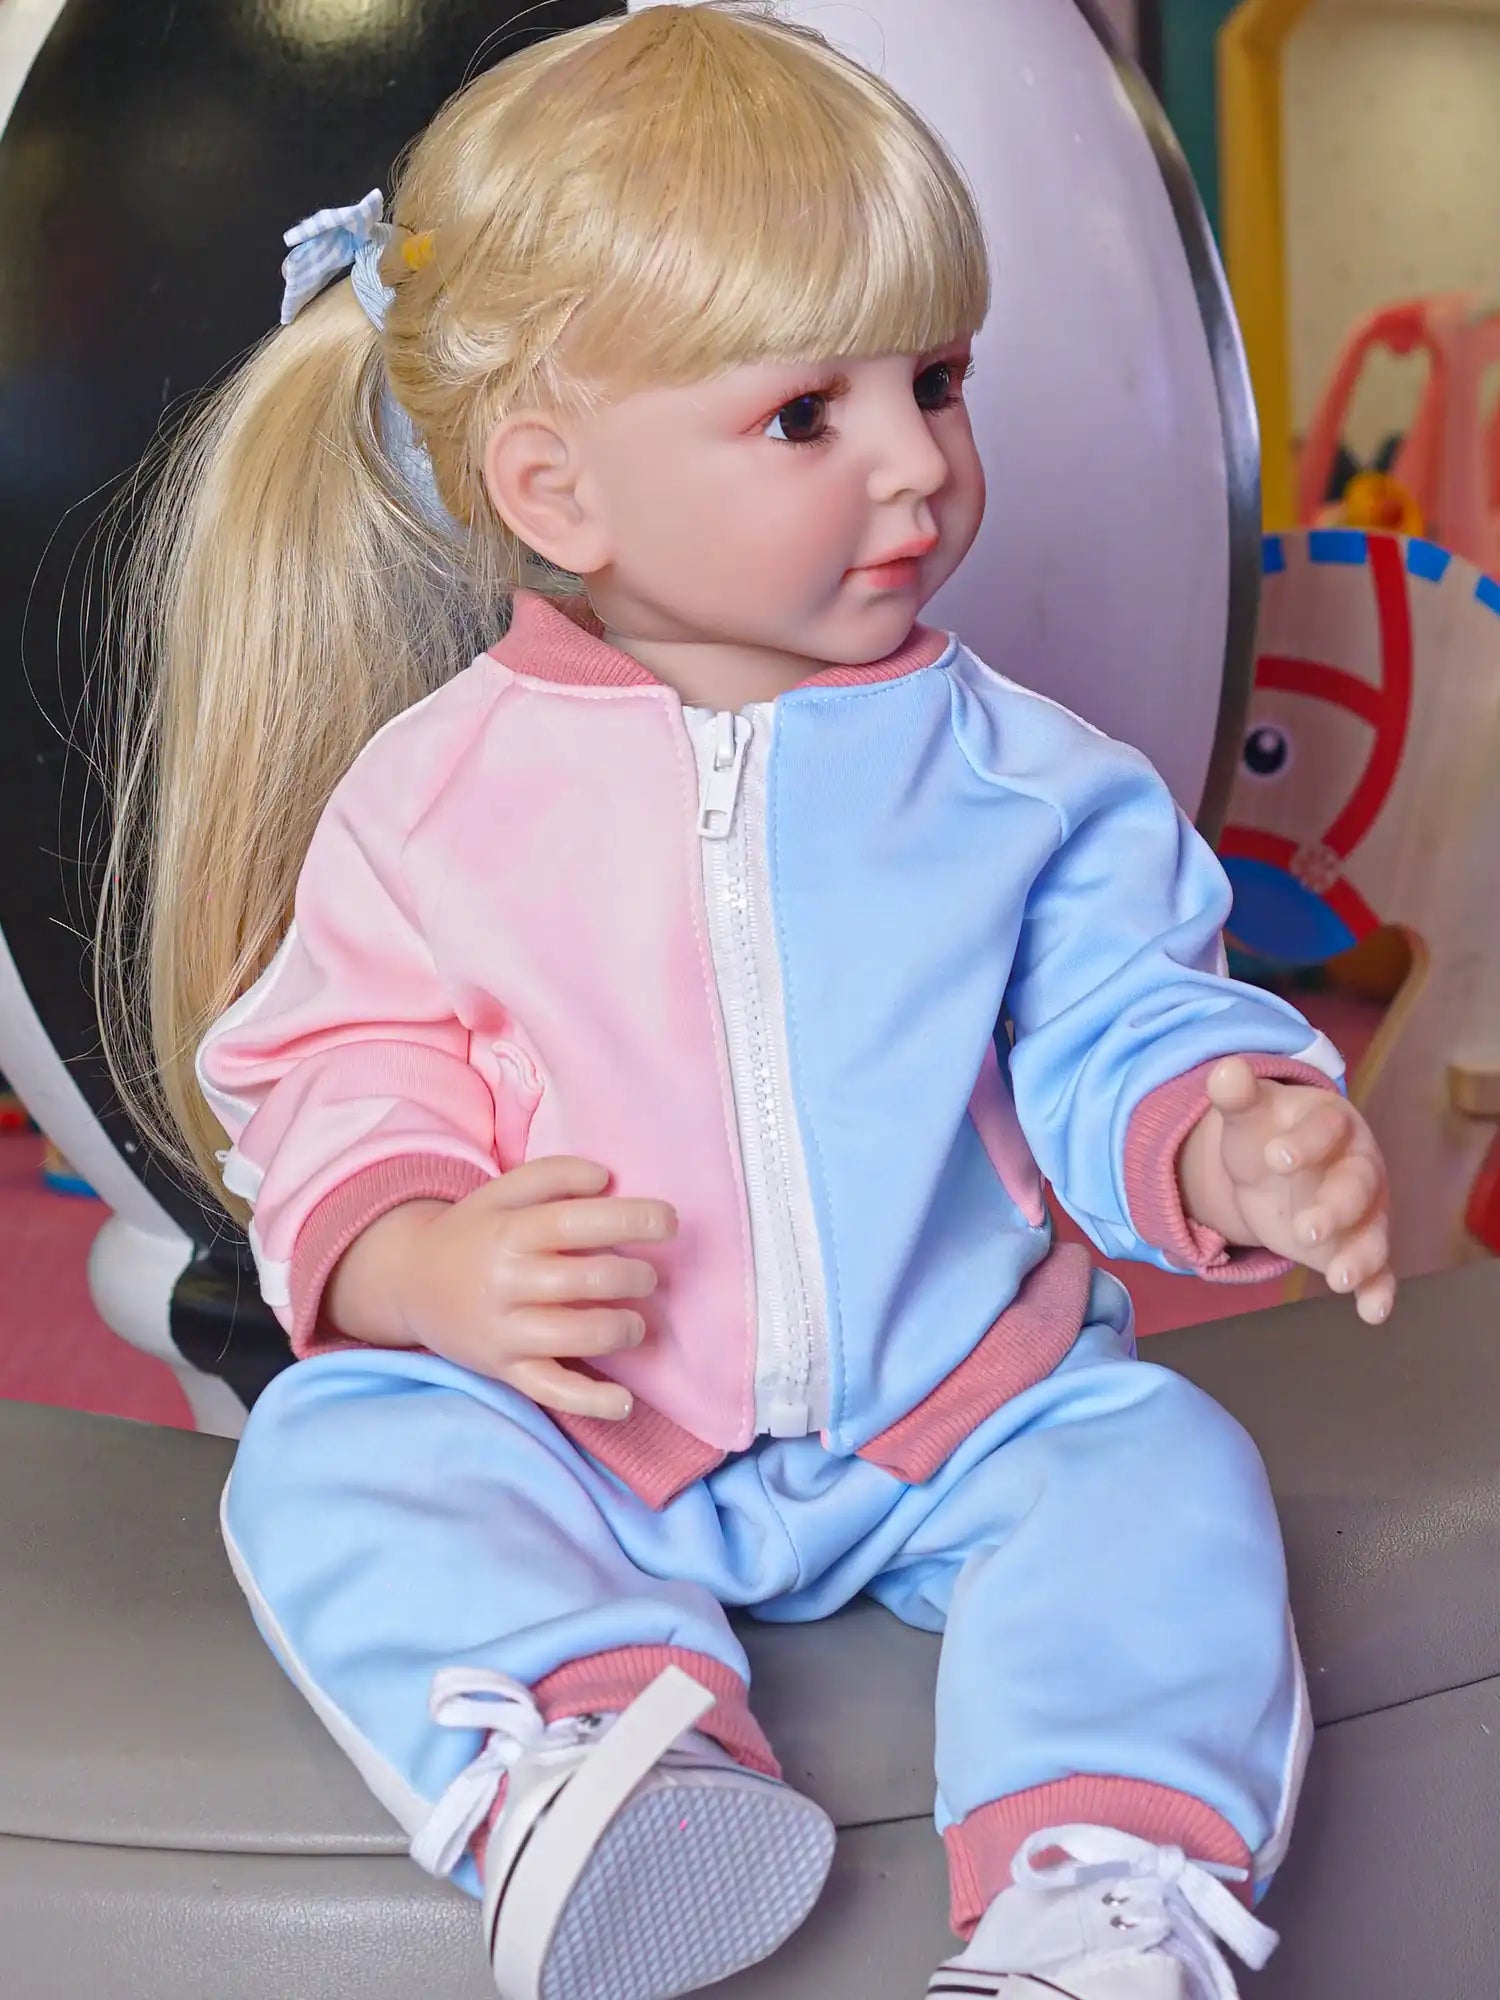 Lifelike sitting doll with a blonde haircut and soft-colored outfit.